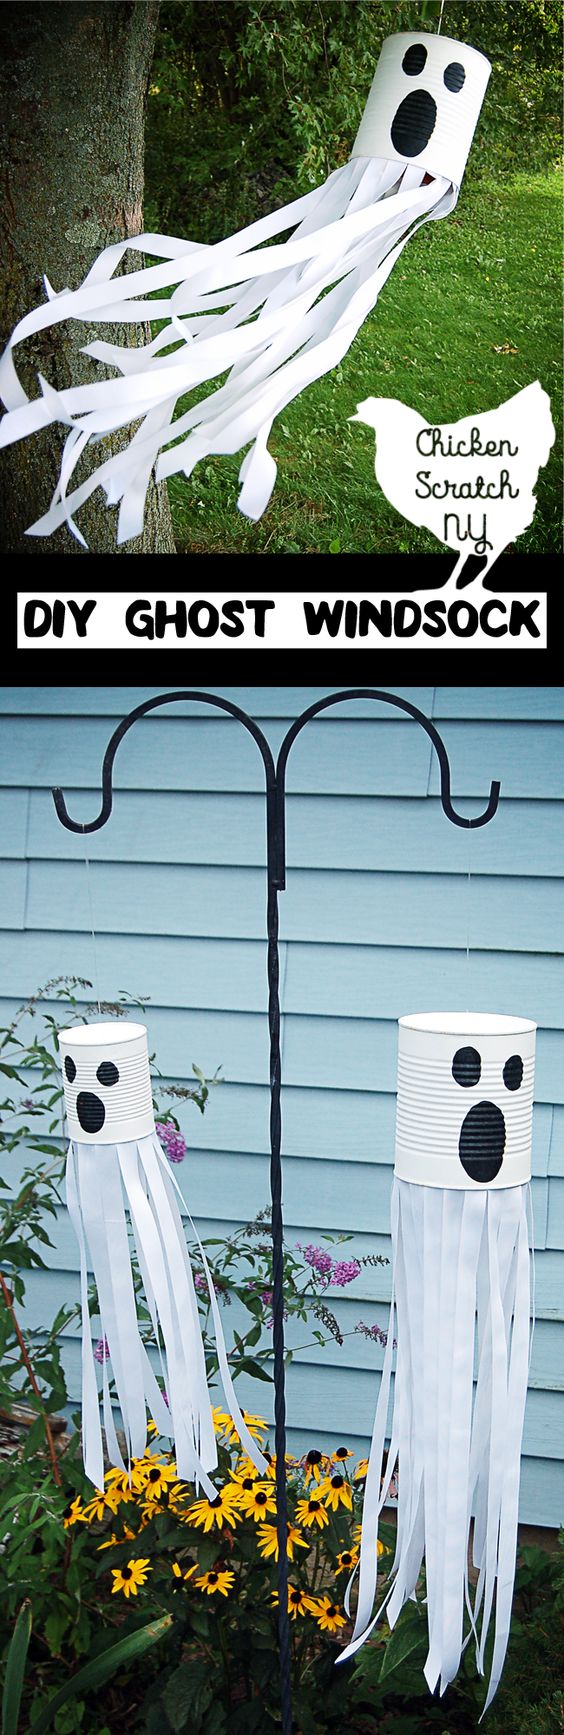 Tin Can Ghost Windsock